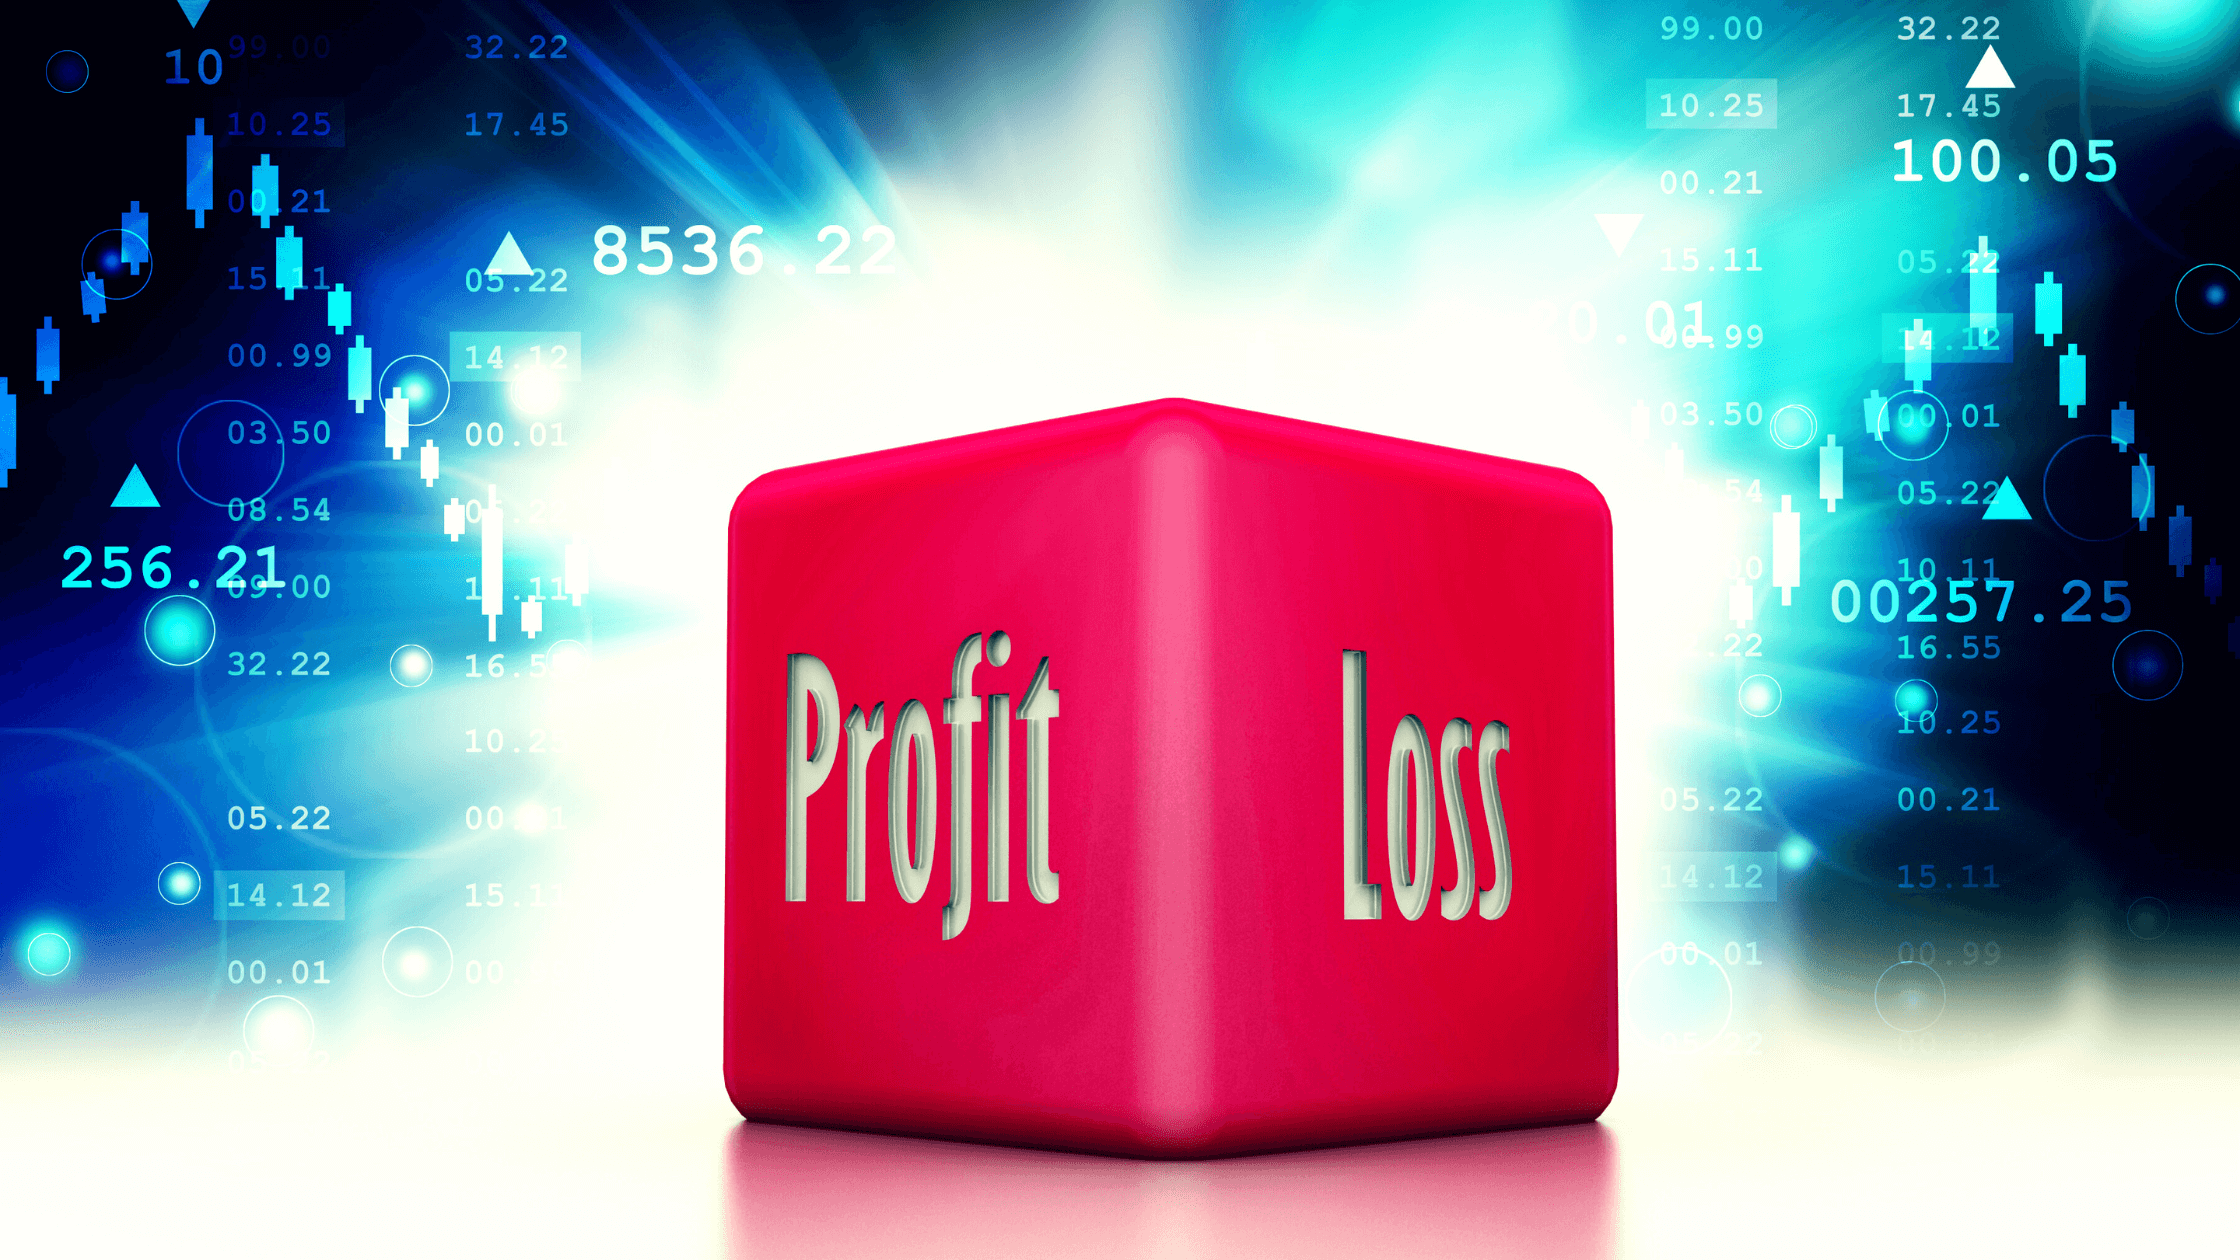 Pink dice that says 'profit' and 'loss' in front of a dark background with financial numbers and charts.